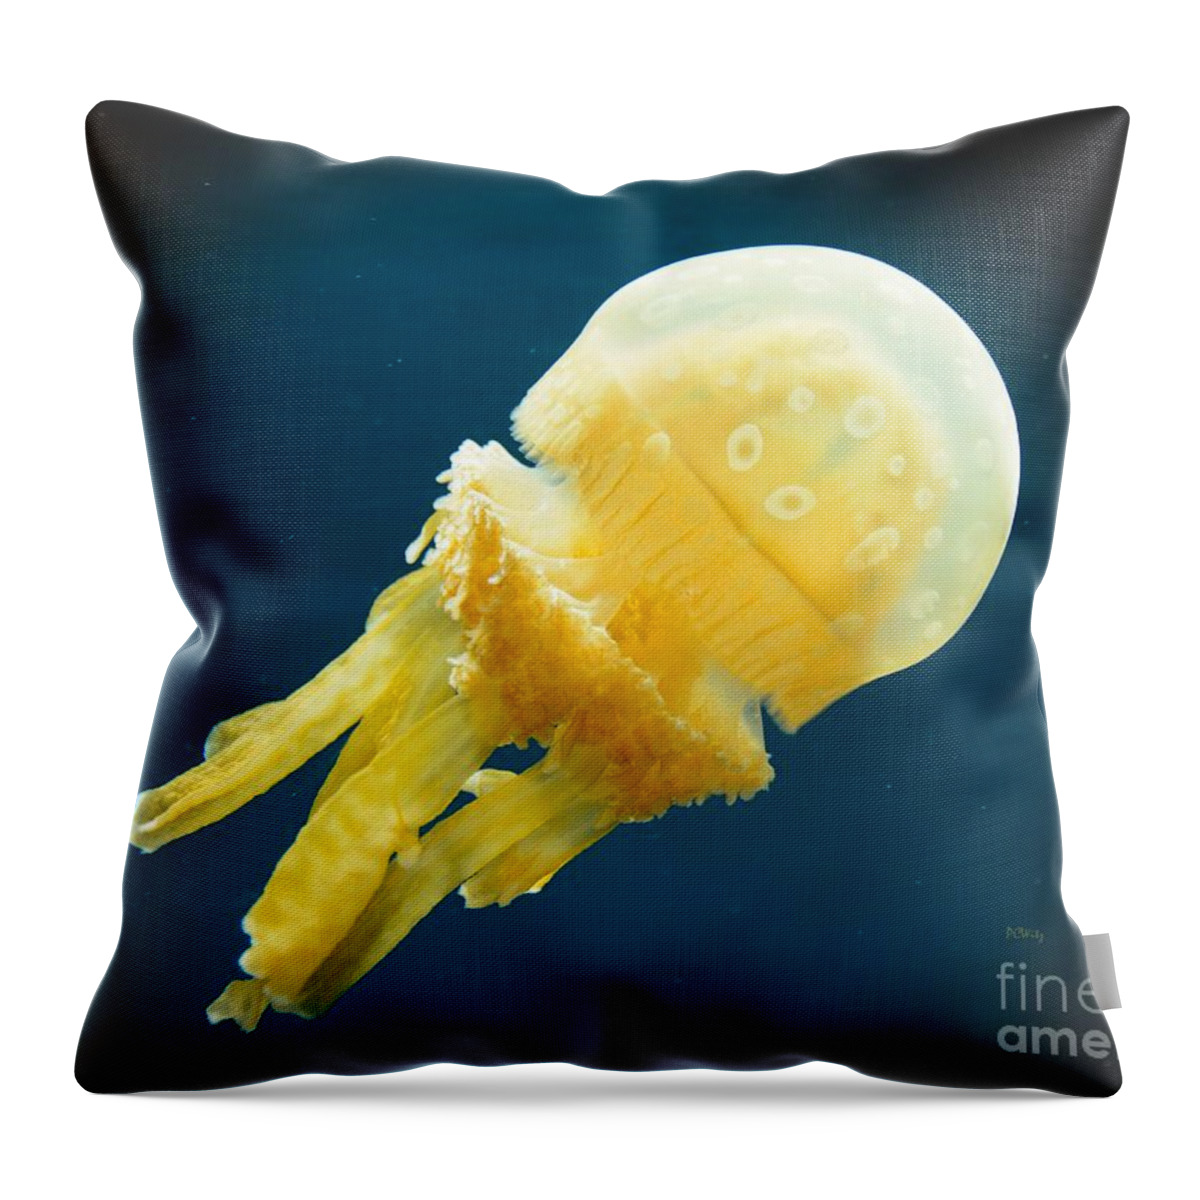 Alien Jelly Throw Pillow featuring the photograph Alien Jelly by Patrick Witz